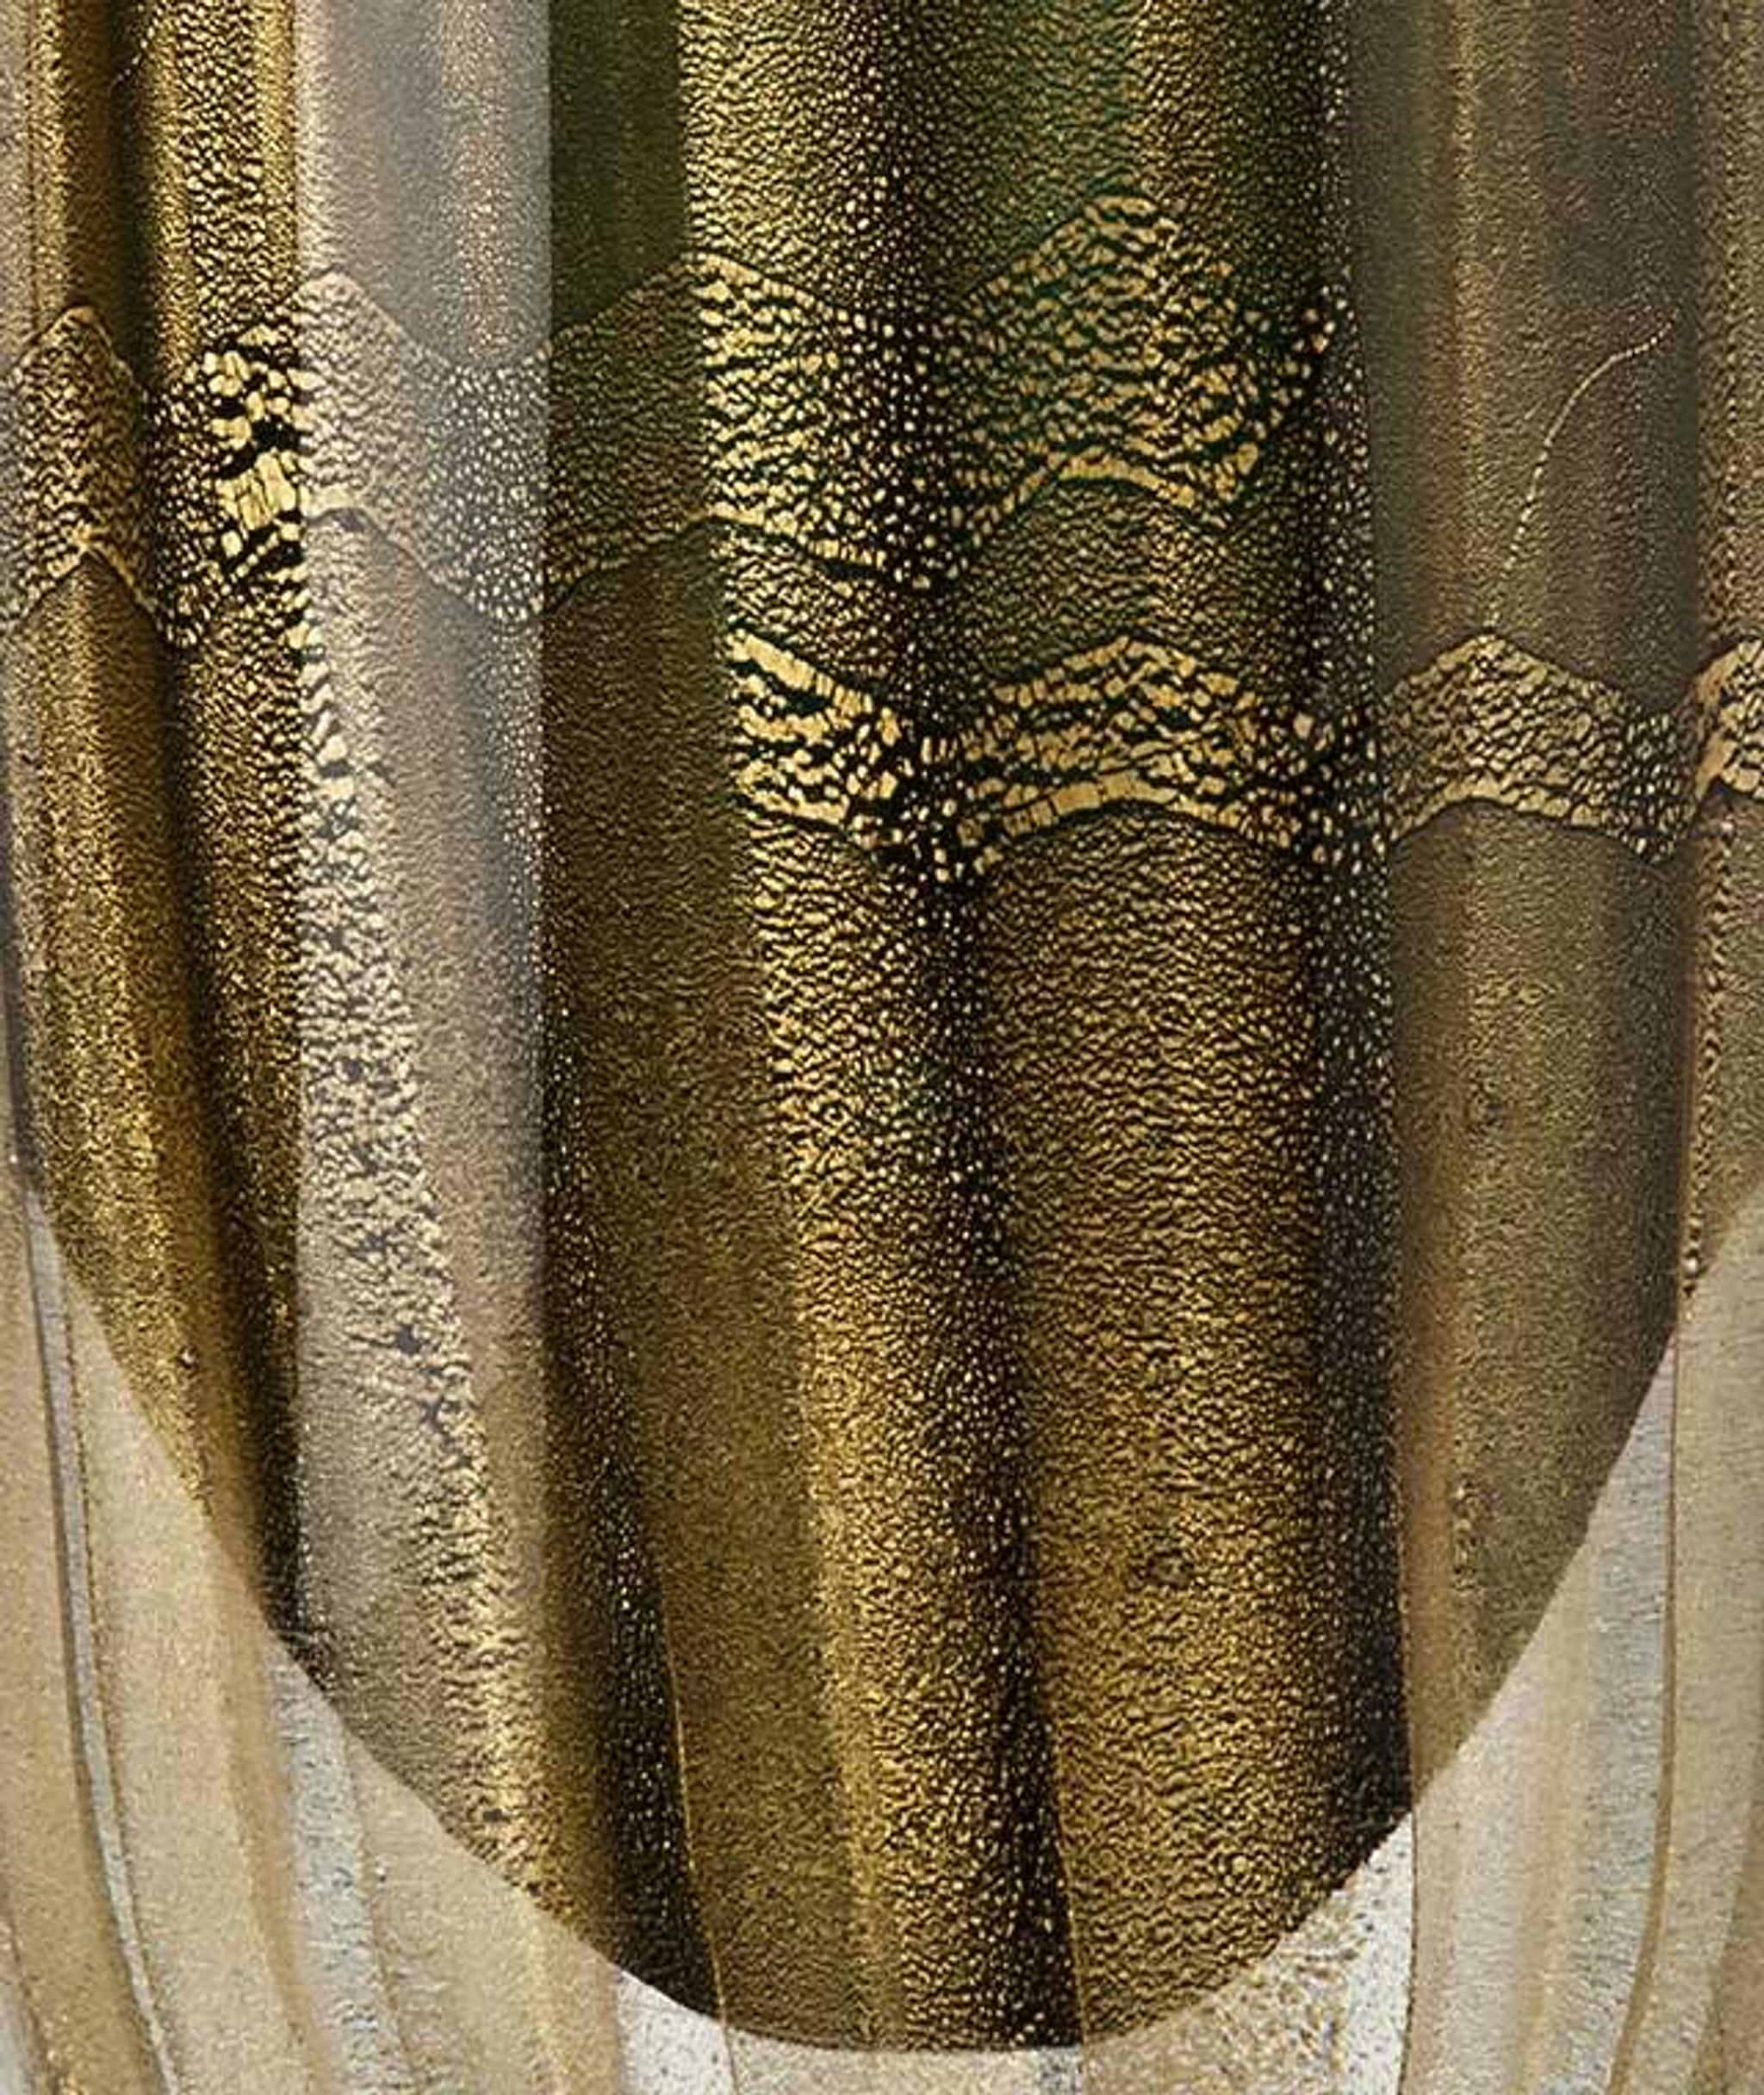 Detail of the Sommersi Foglia Tall vase by Carlo Scarpa for Venini.